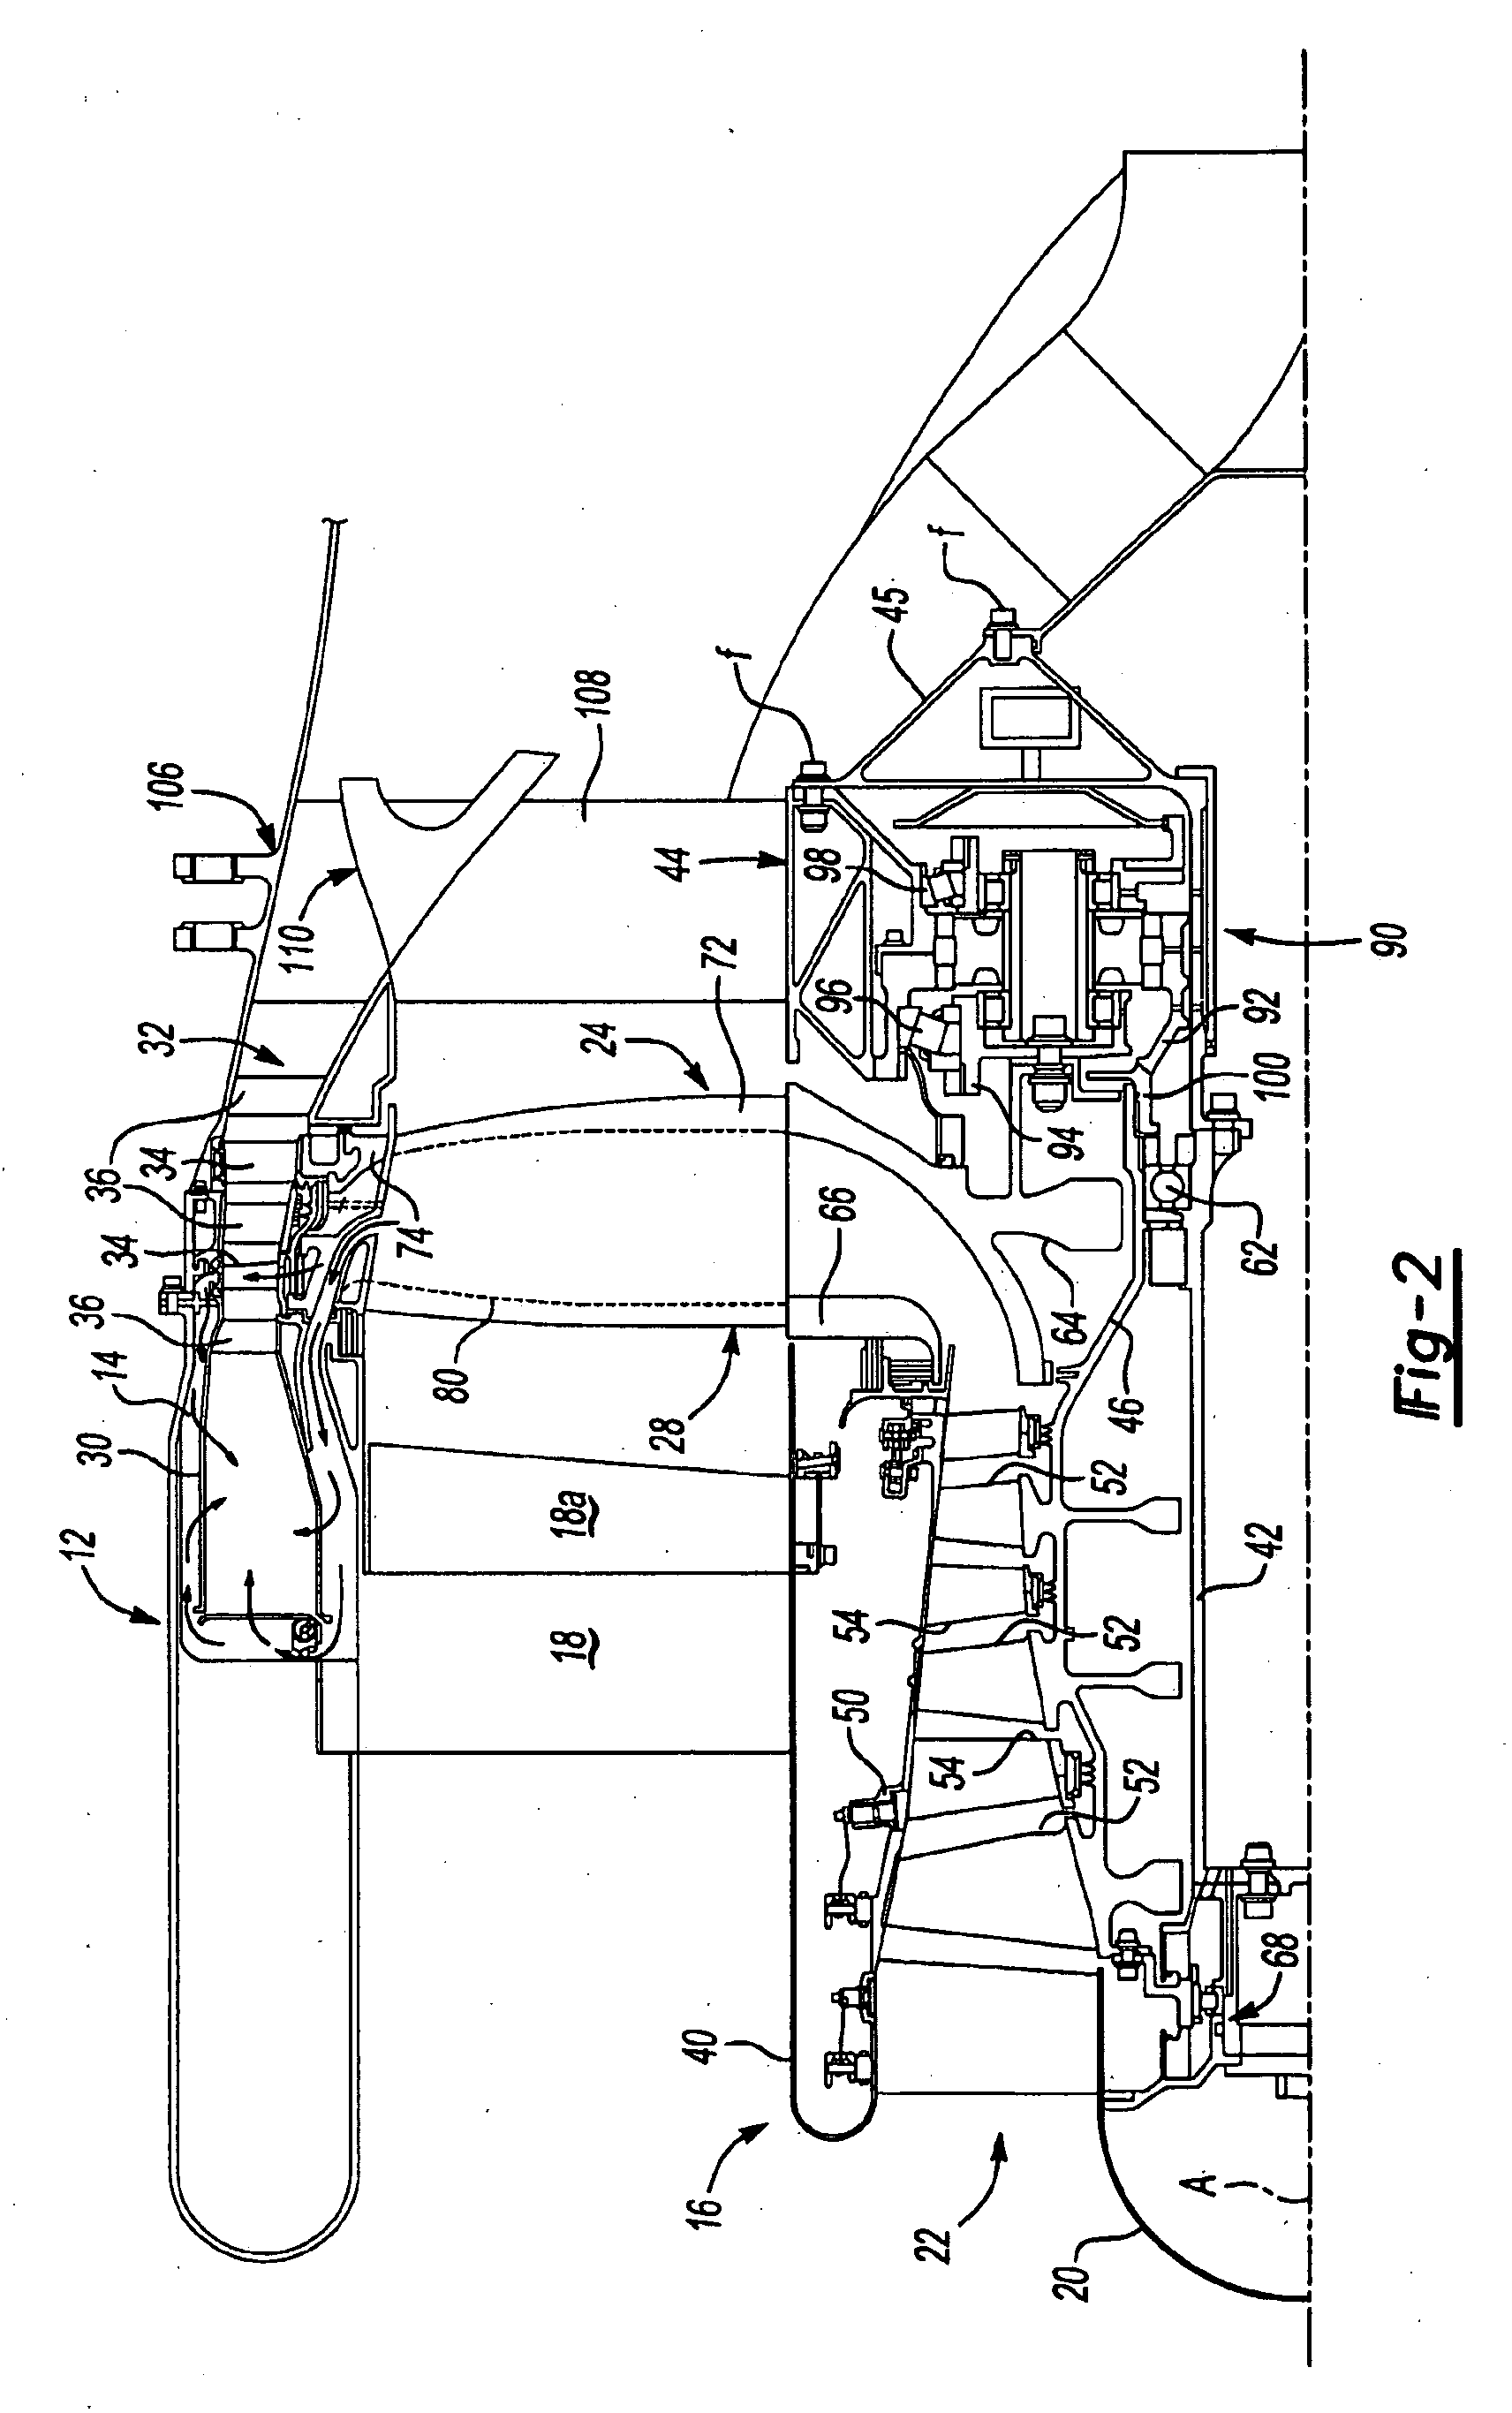 Fan-turbine rotor assembly for a tip turbine engine